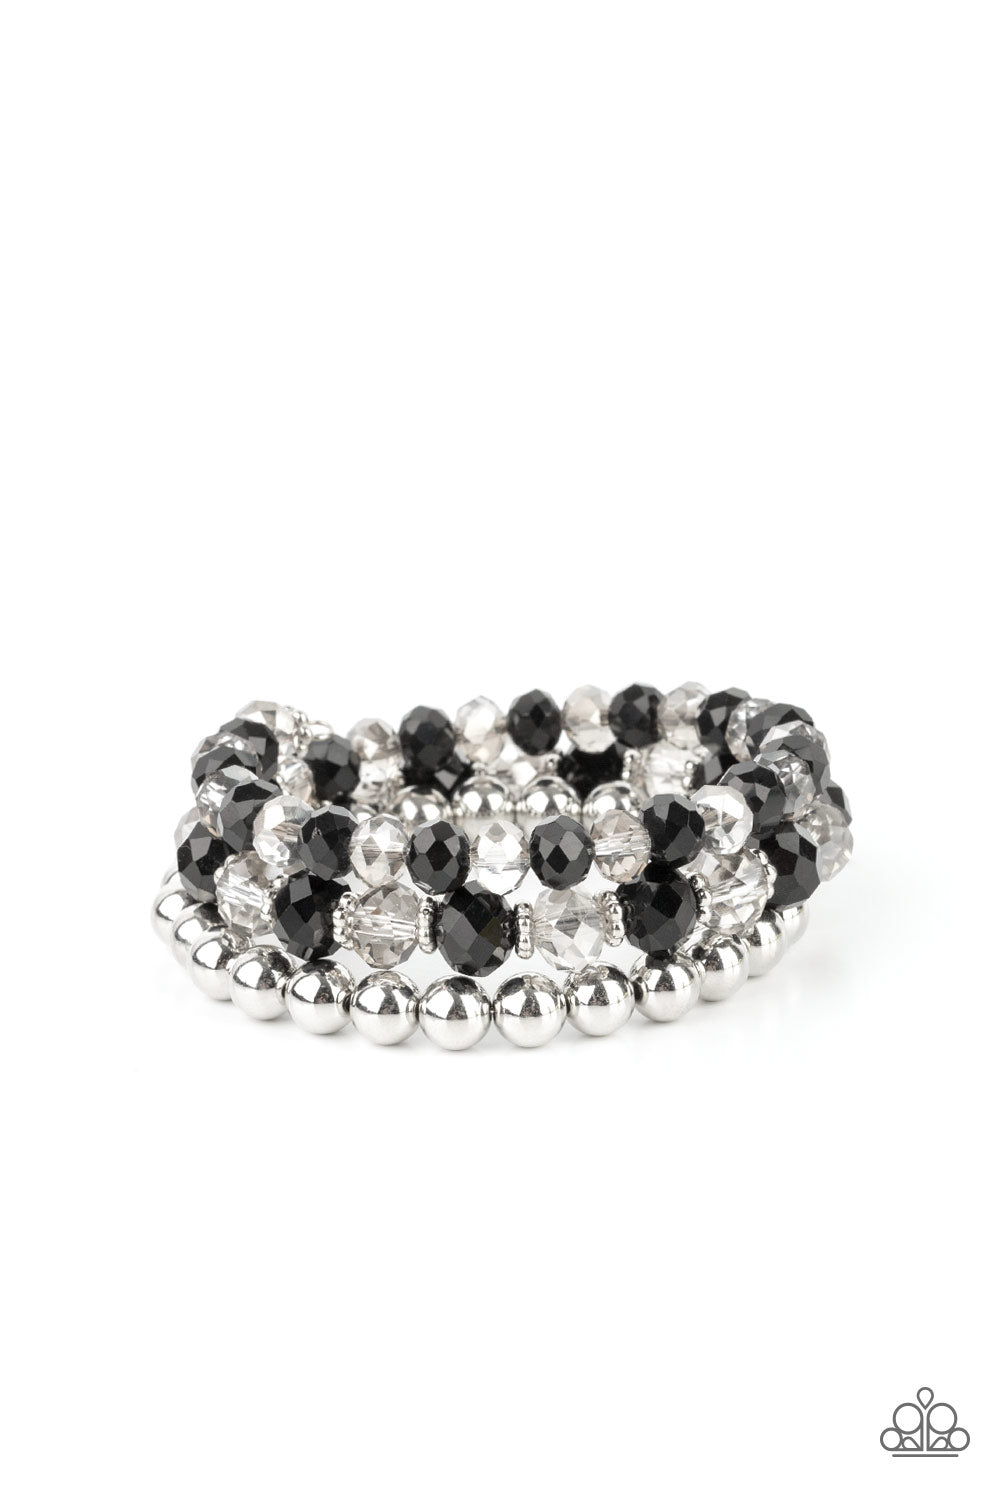 Gimme Gimme - Black/Silver coiled wire bracelet